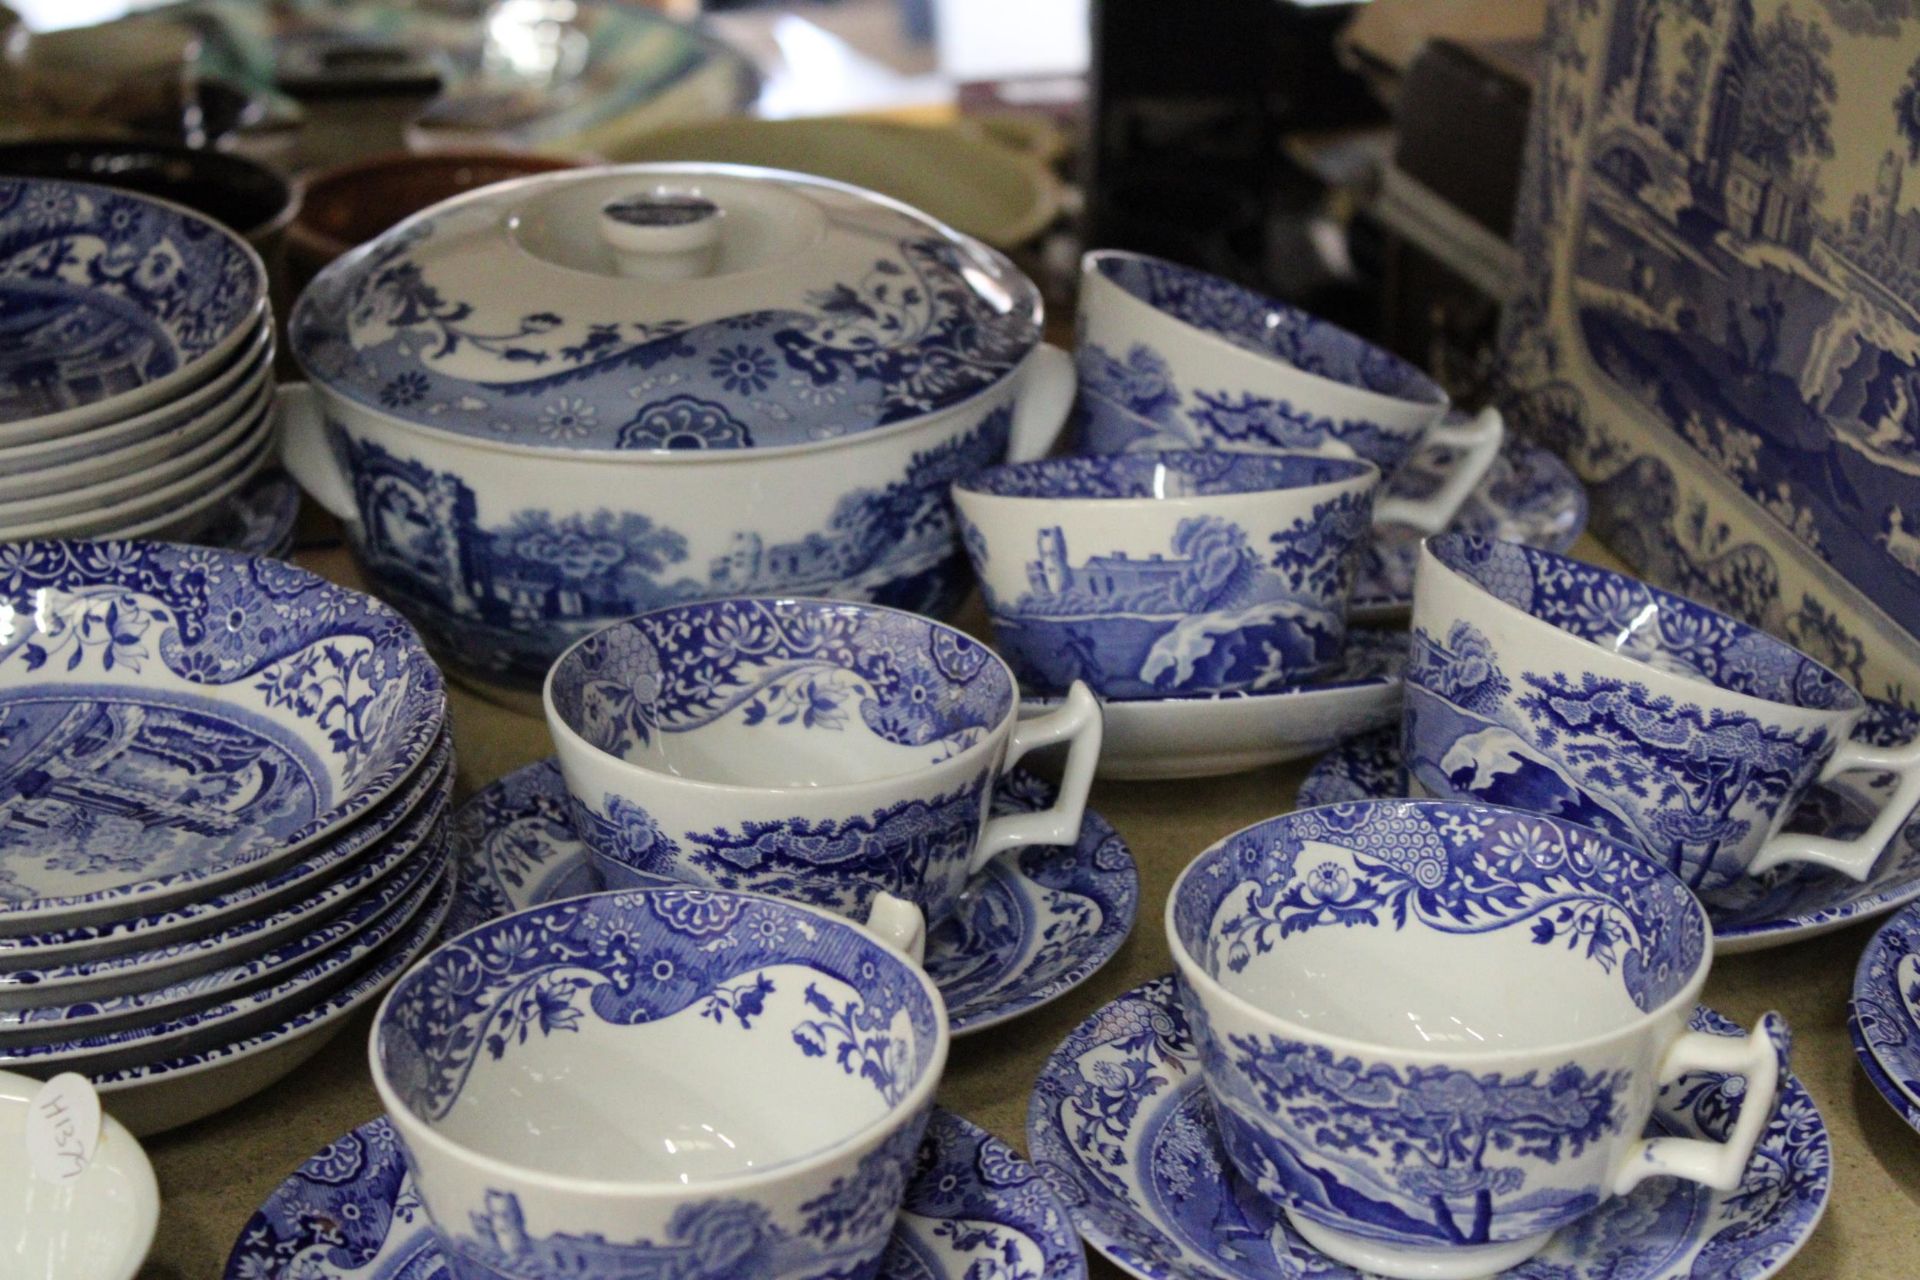 A LARGE COLLECTION OF SPODE BLUE ITALIAN WARE TO INCLUDE LIDDED BOWLS, KETTLE, SUGAR BOWL AND - Image 6 of 7